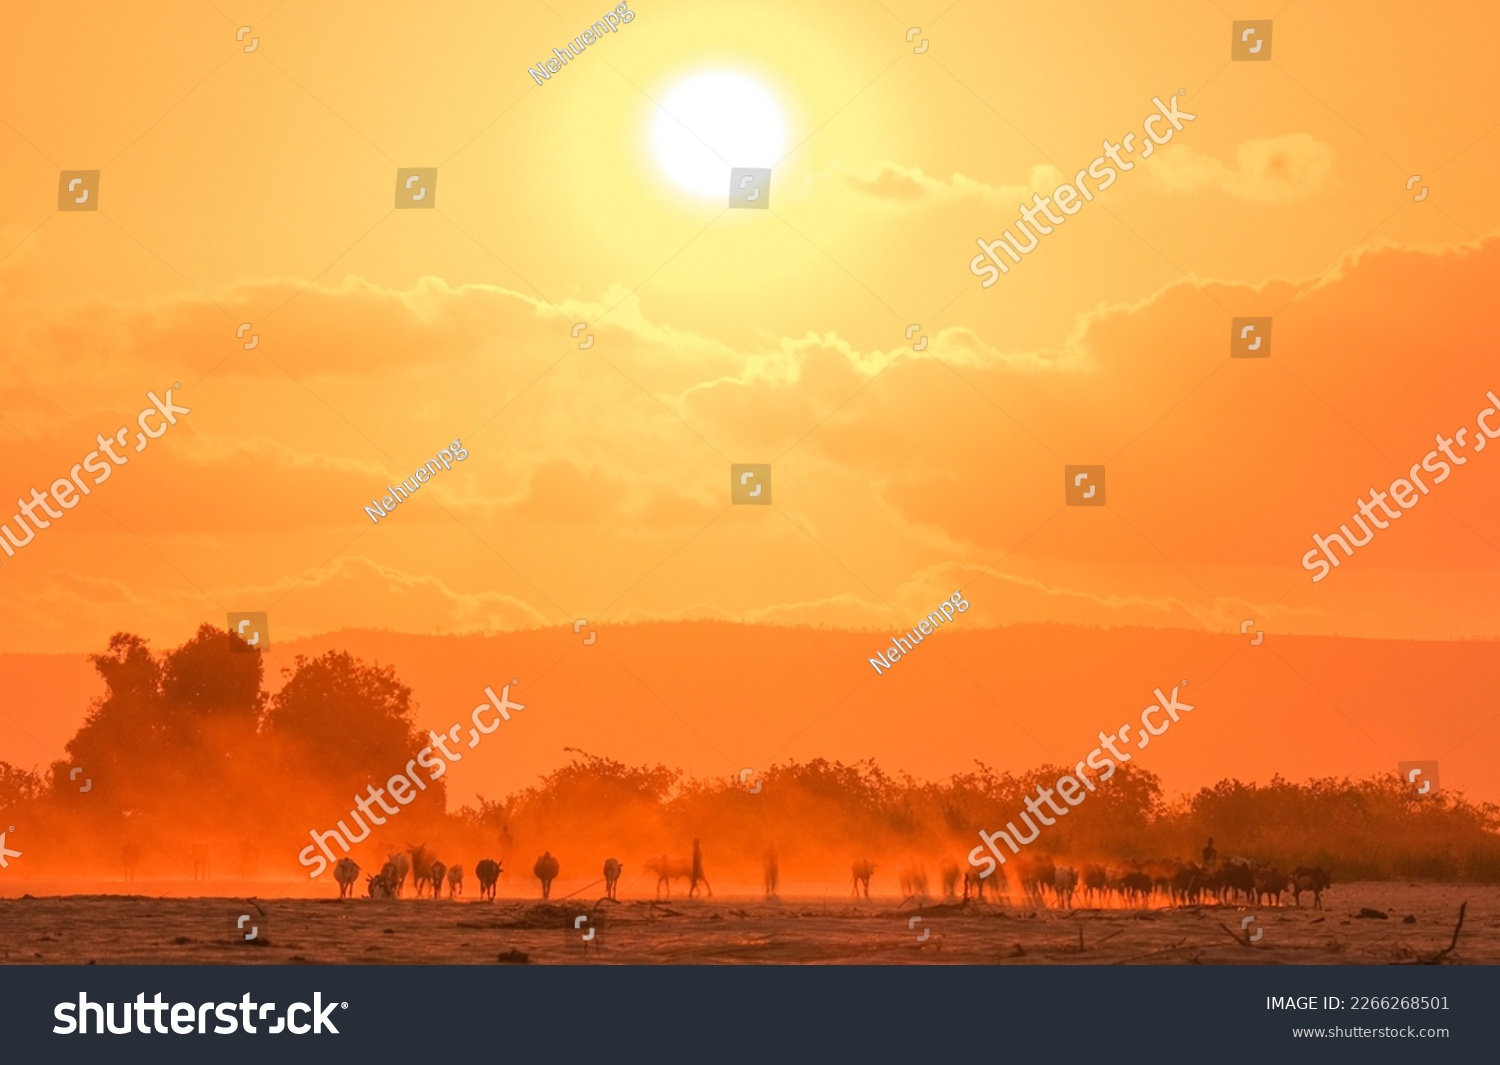 Silhouette of African animals going to drink water during the sunset in madagascar #2266268501